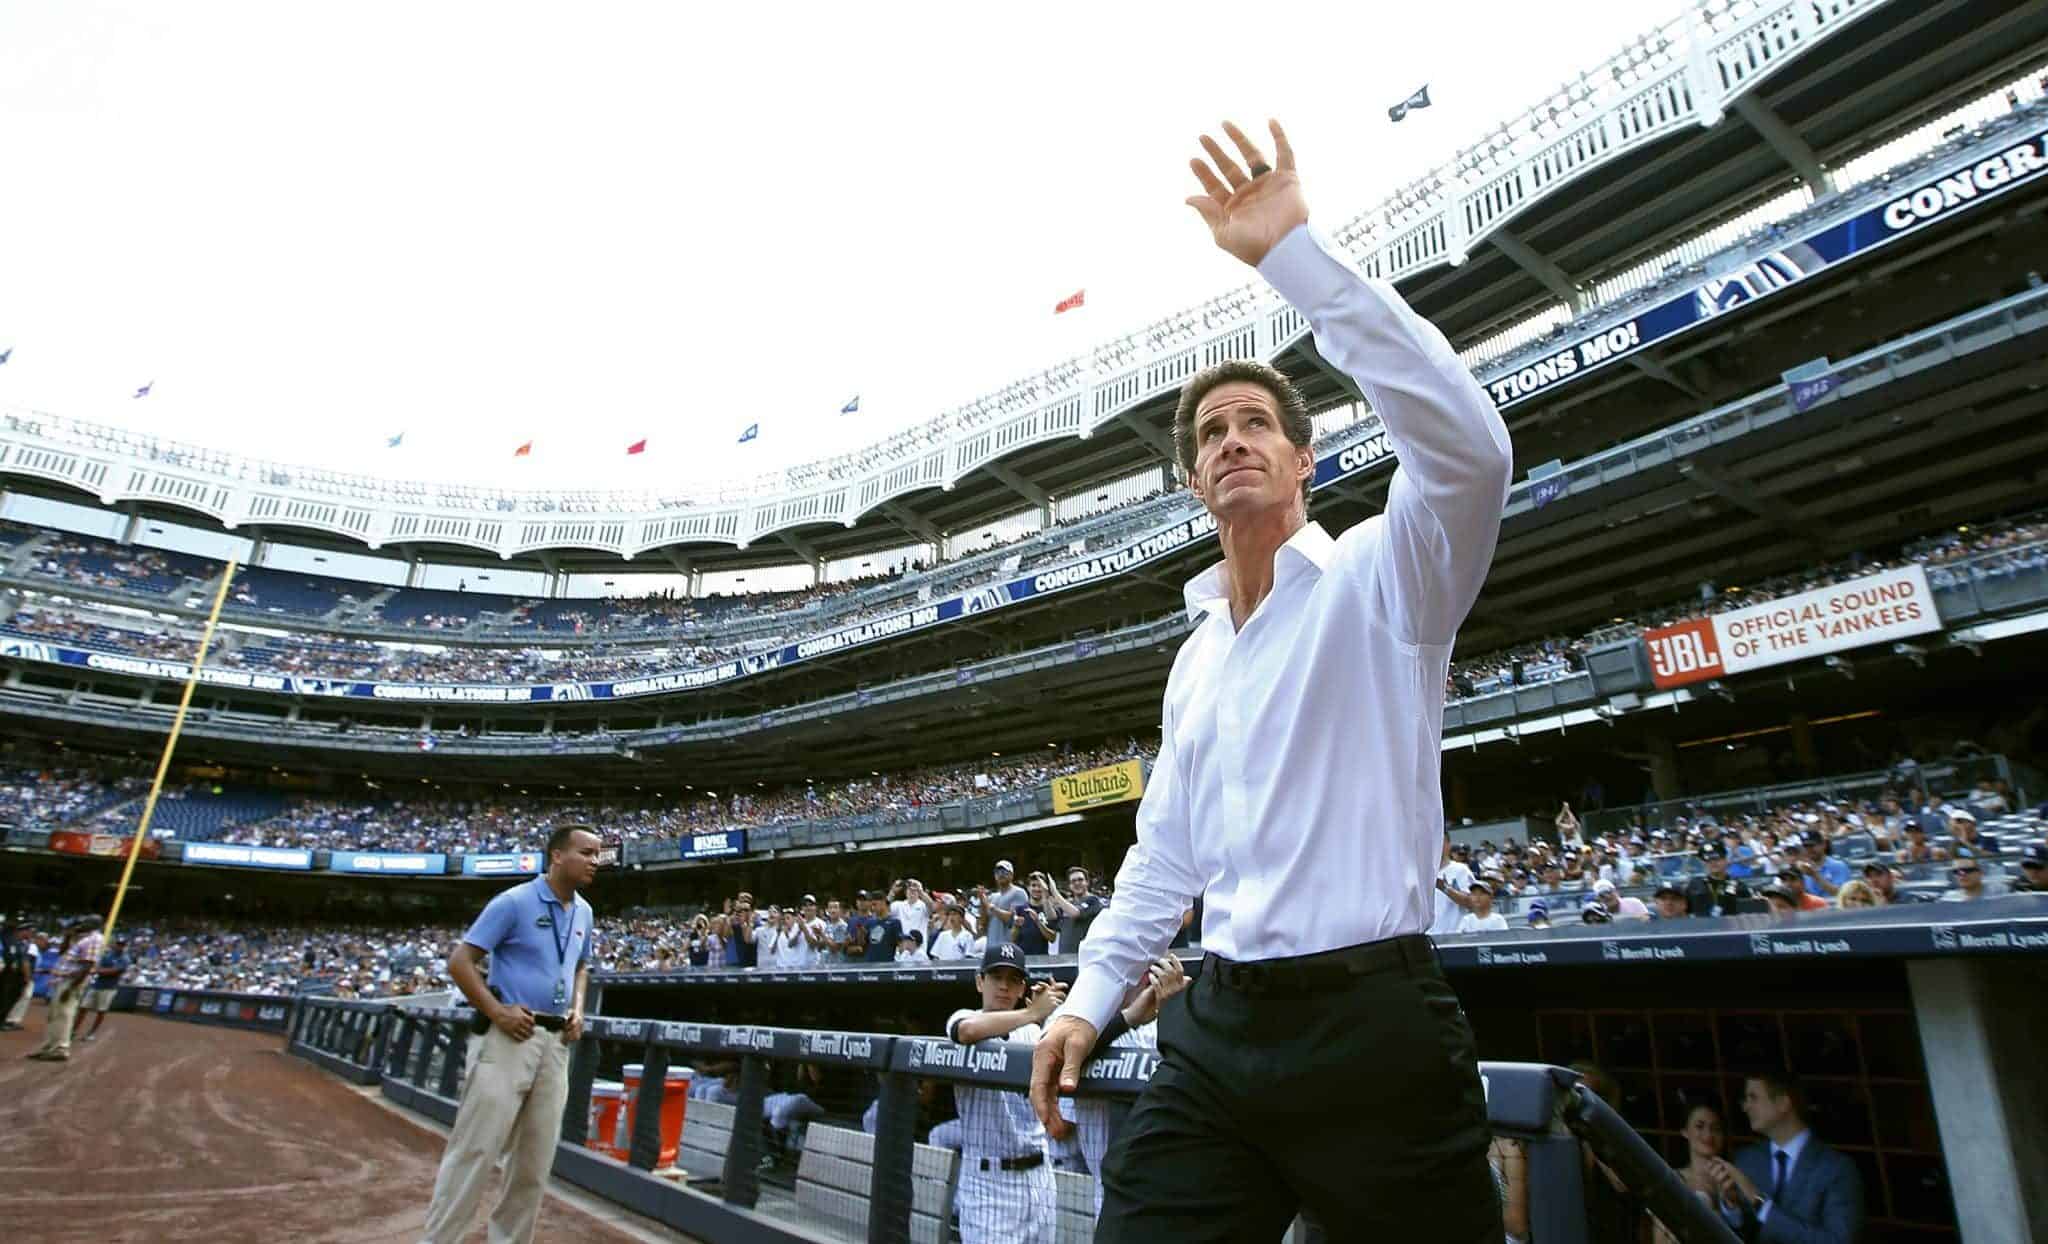 NEW YORK, NY - AUGUST 14: Former New York Yankee Paul O'Neil waves as he is introduced during a ceremony honoring Mariano Rivera before a game between the Tampa Bay Rays and the New York Yankees at Yankee Stadium on August 14, in the Bronx borough of New York City.